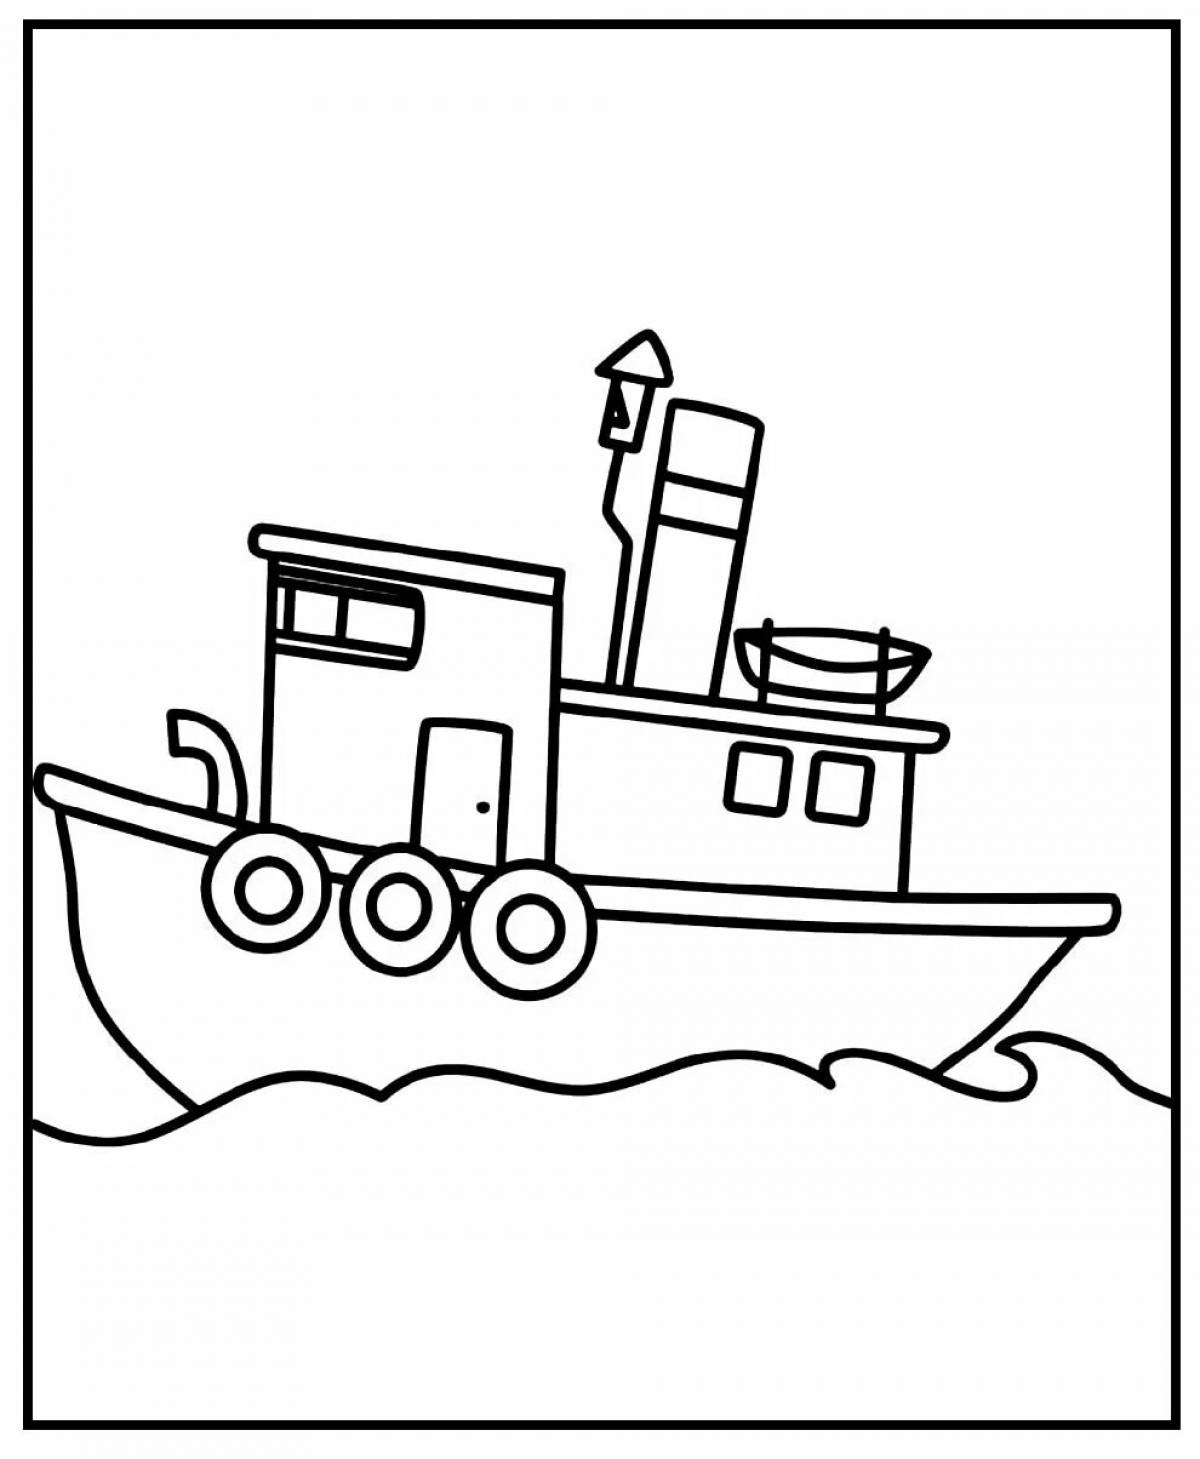 Zany steamboat coloring book for kids